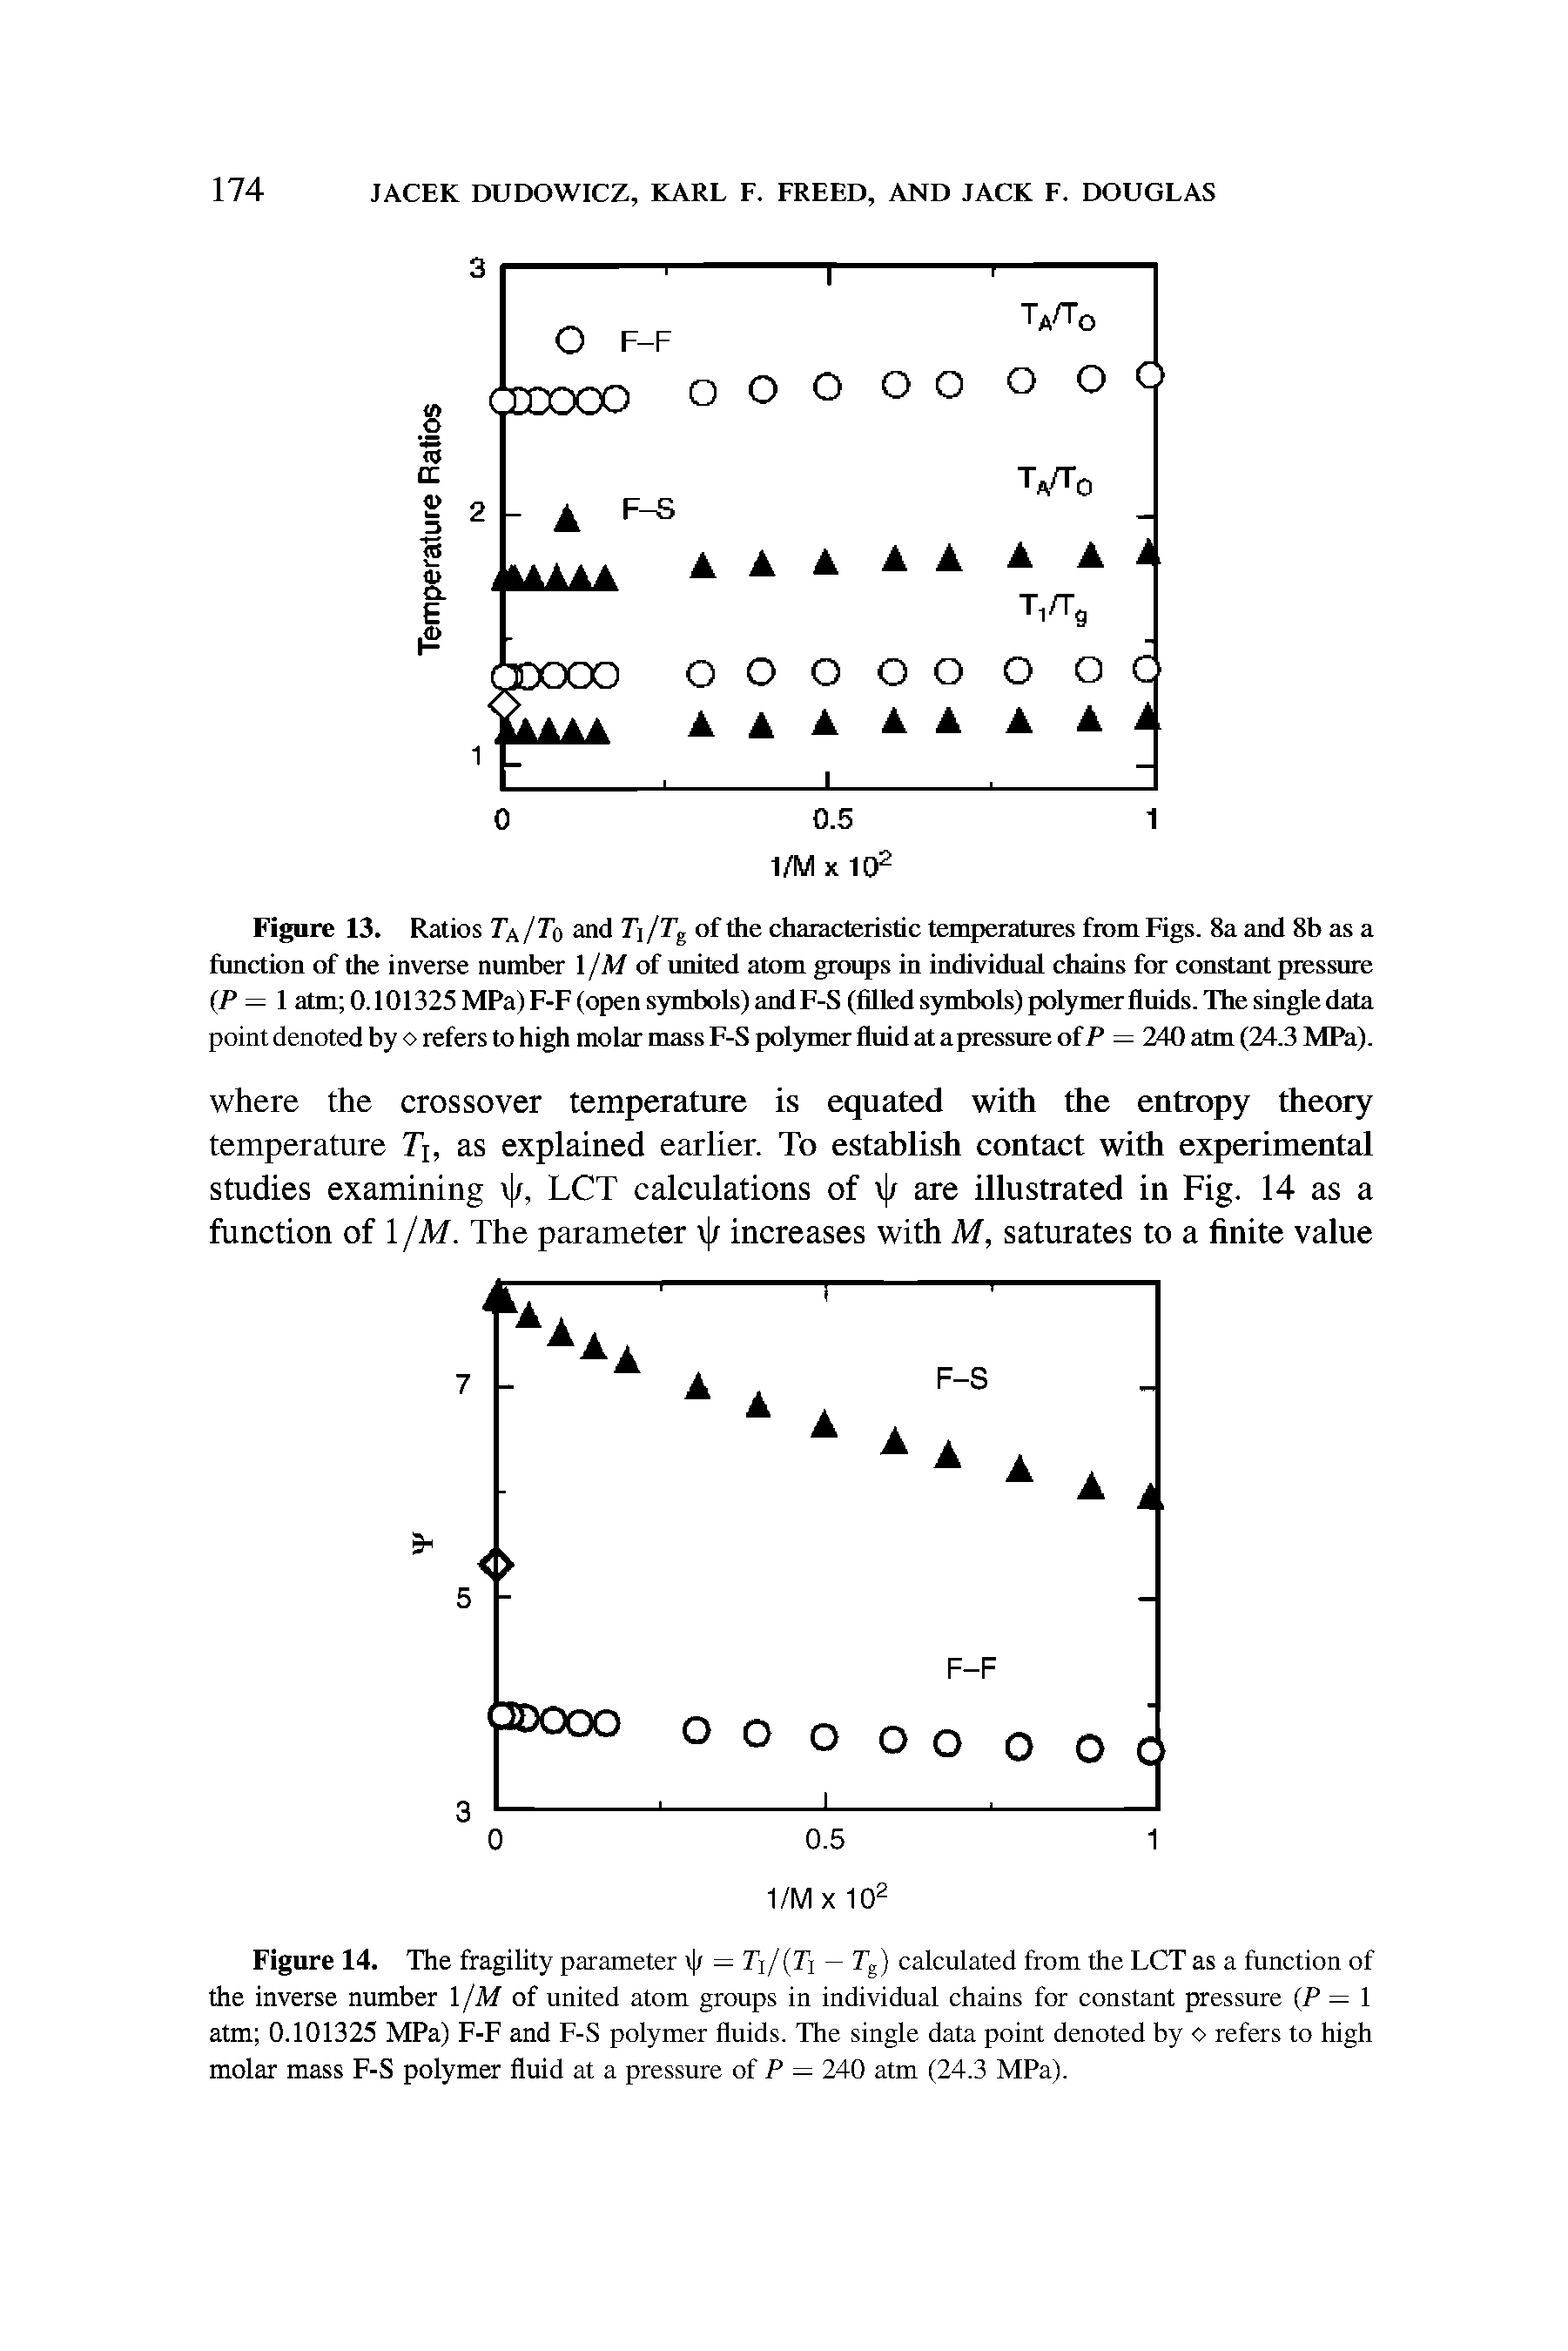 Figure 14. The fragility parameter v t = Ti/ Ti — Tg) calculated from the LCT as a function of the inverse number l/M of united atom groups in individual chains for constant pressure (P = 1 atm 0.101325 MPa) F-F and F-S polymer fluids. The single data point denoted by o refers to high molar mass F-S polymer fluid at a pressure of P = 240 atm (24.3 MPa).